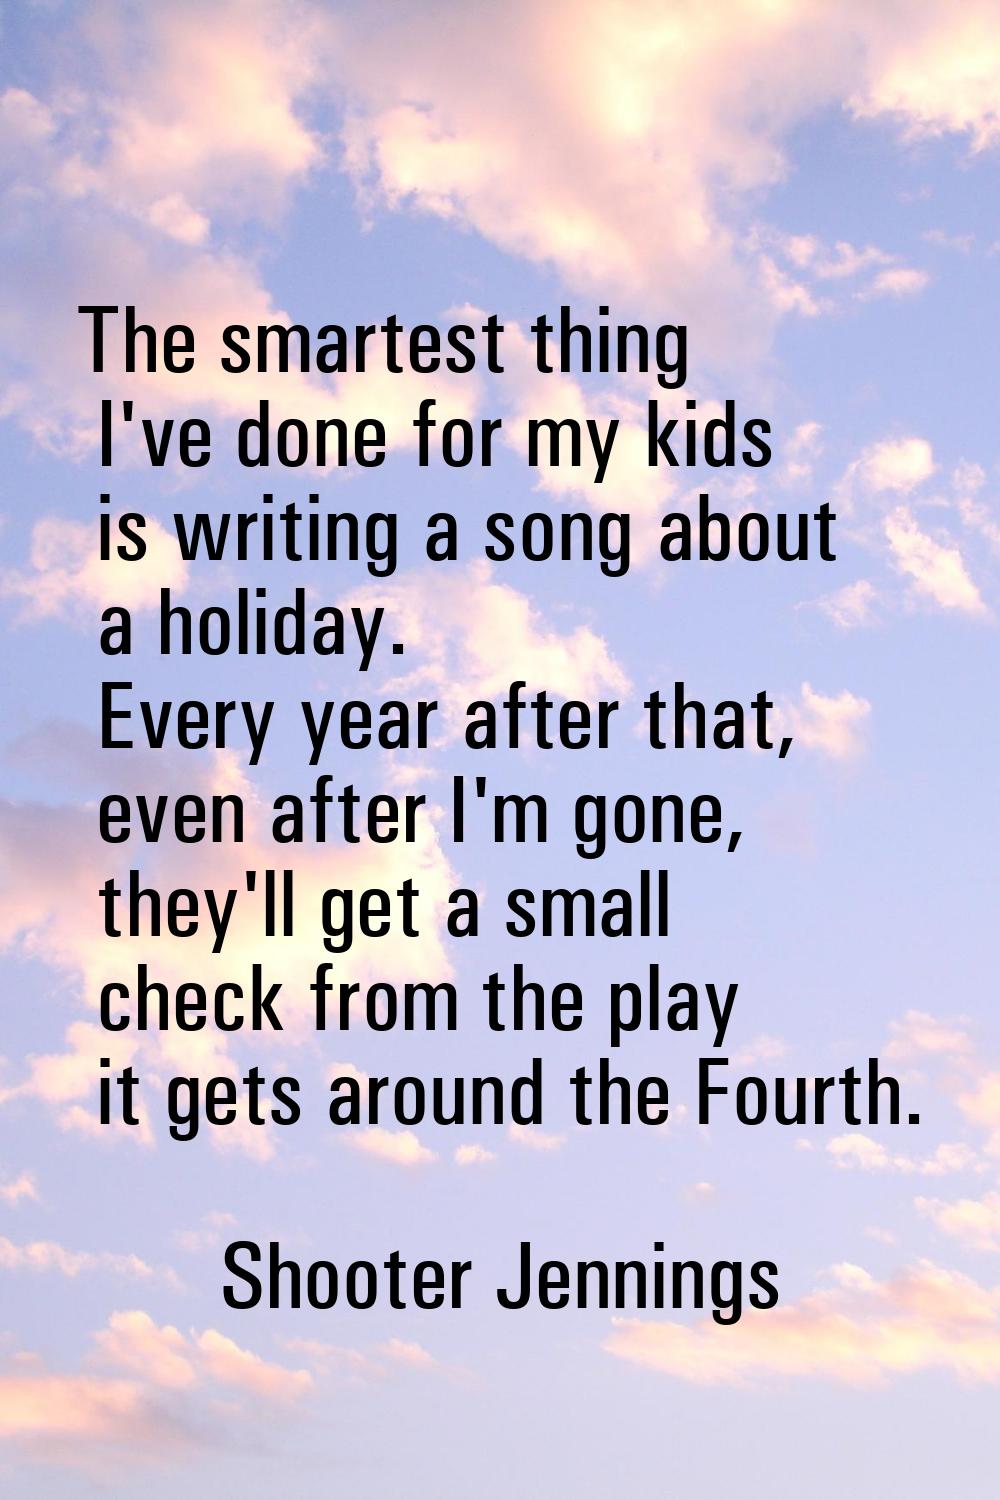 The smartest thing I've done for my kids is writing a song about a holiday. Every year after that, 